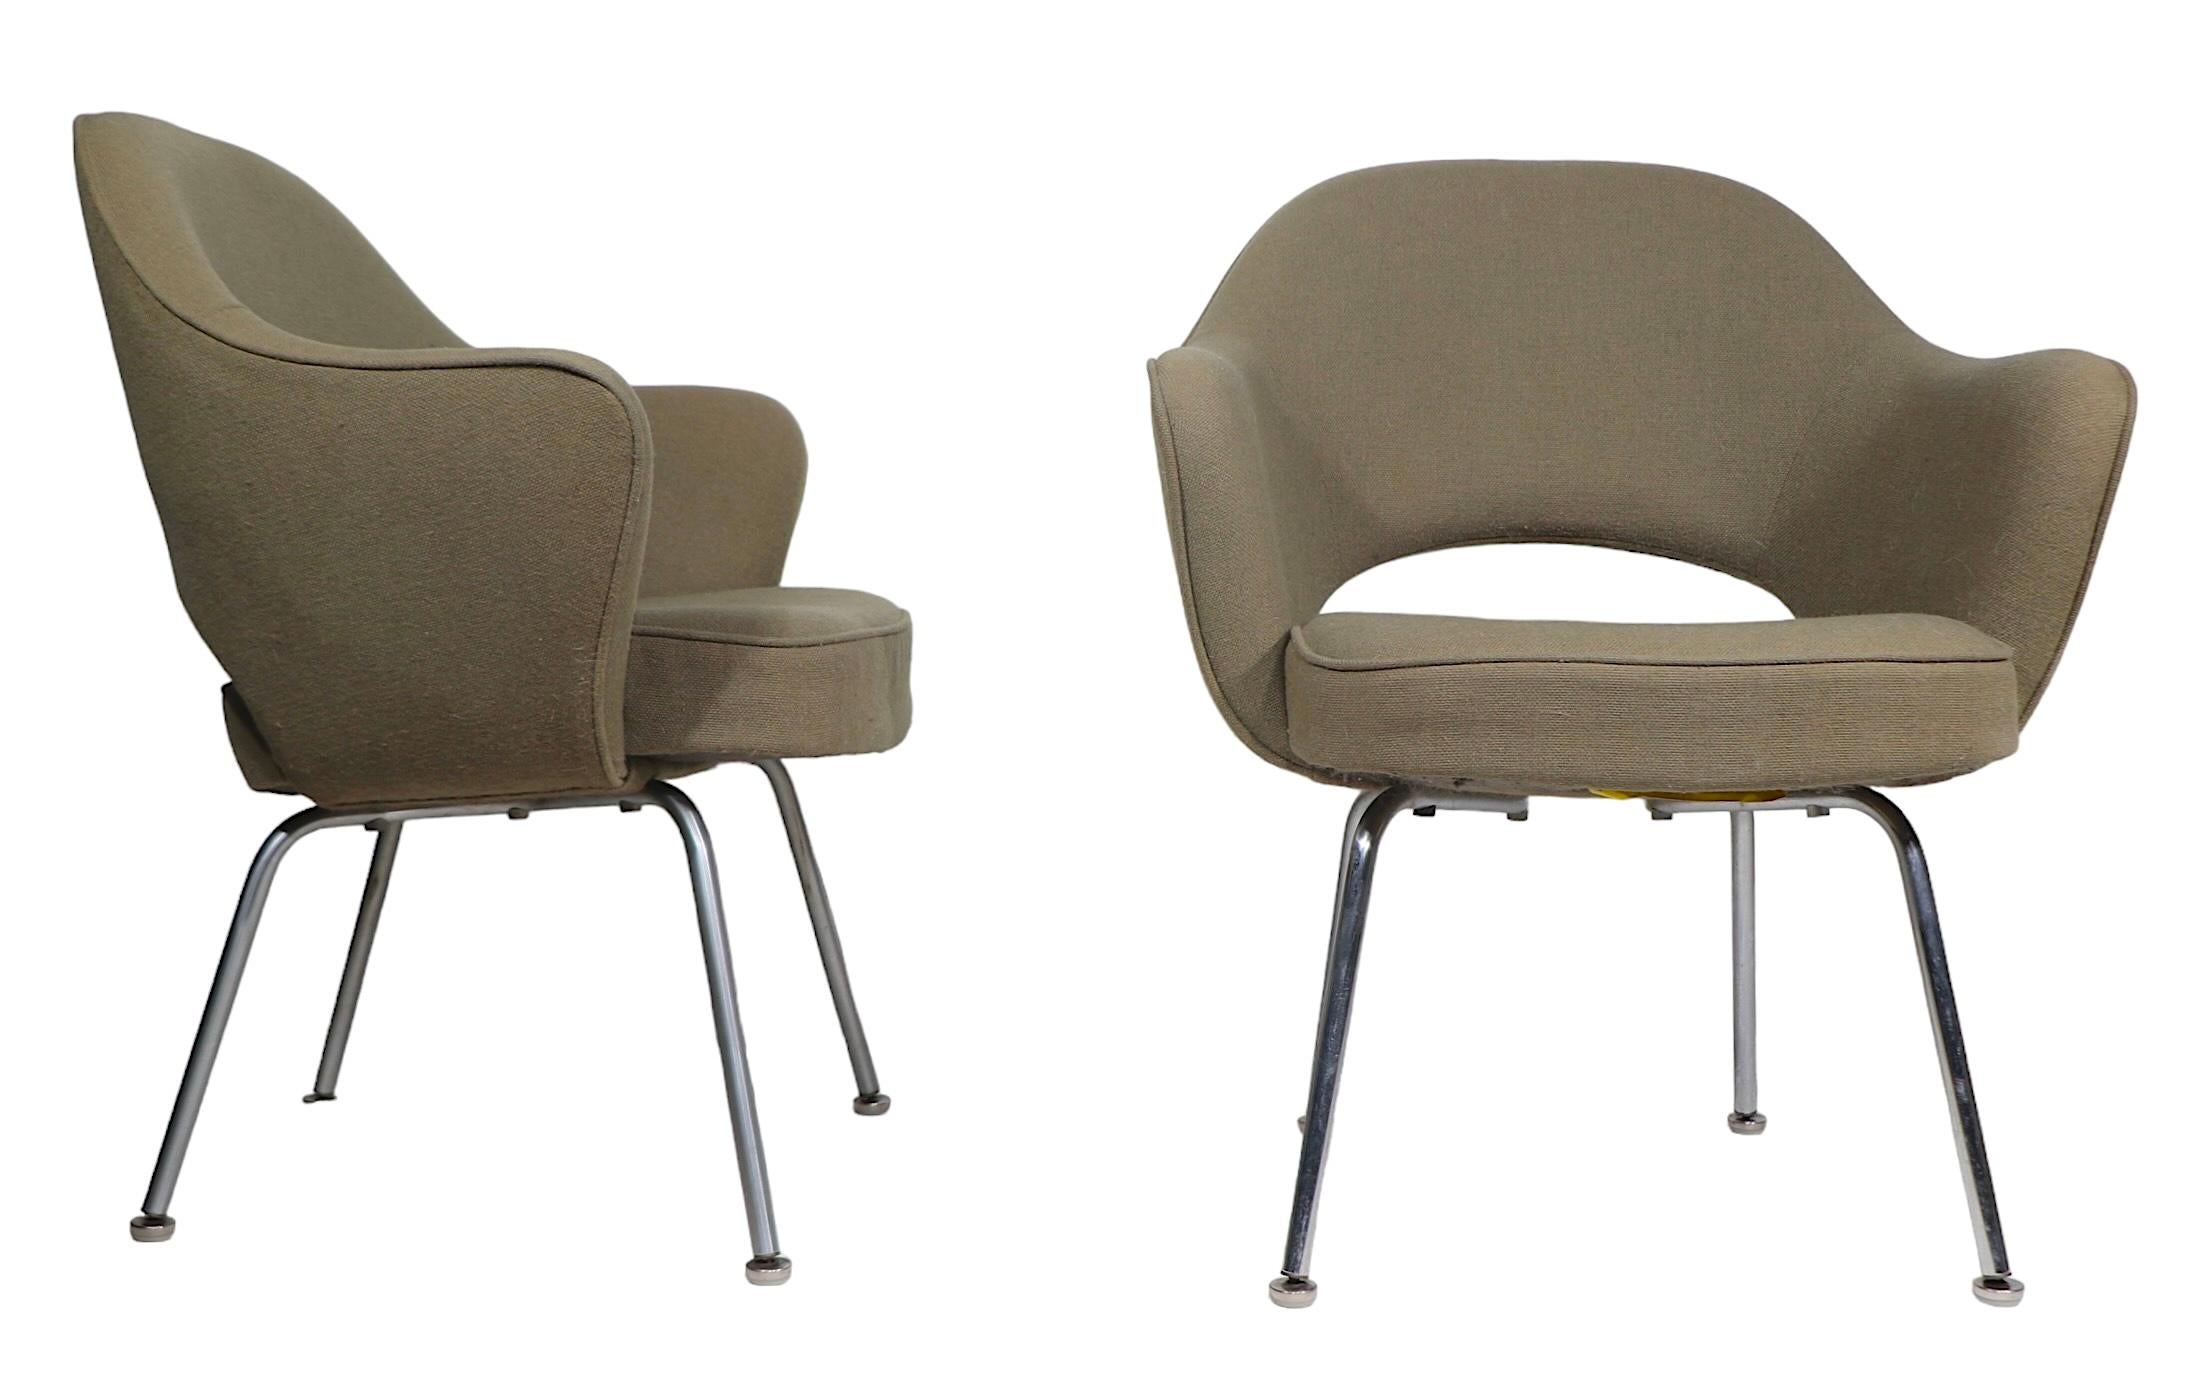 Pr. Vintage Saarinen for Knoll Executive Chairs c. 1960/70's For Sale 5